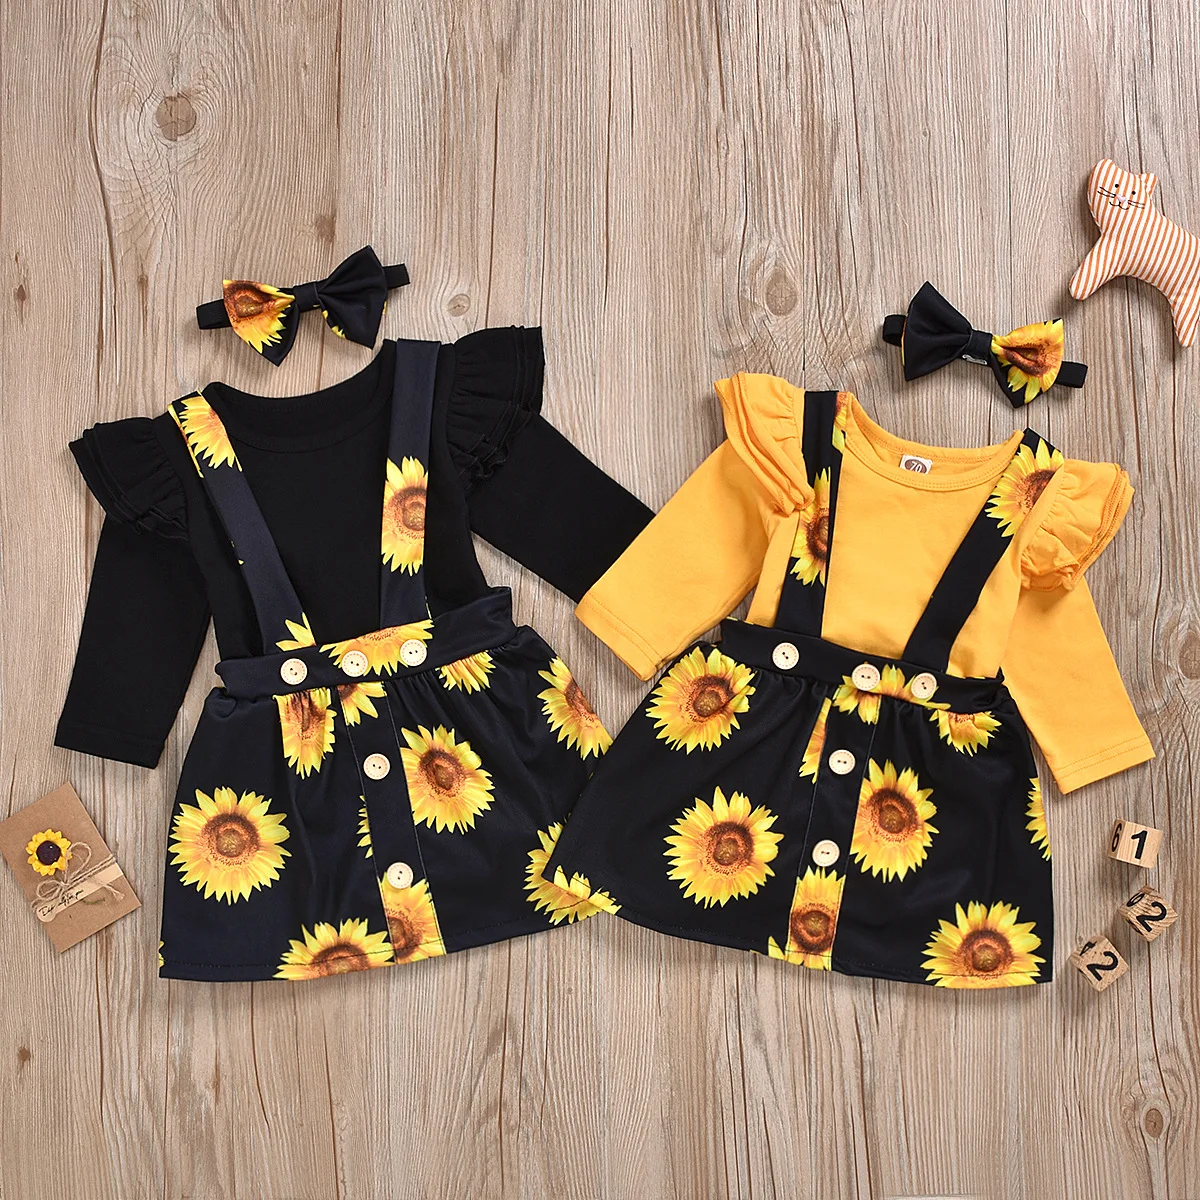 

wholesale 0-24M Toddler Kids Baby Girl Dress Set Tops Romper Suspender Skirt Dress 3Pcs Outfits Clothes, As image shown